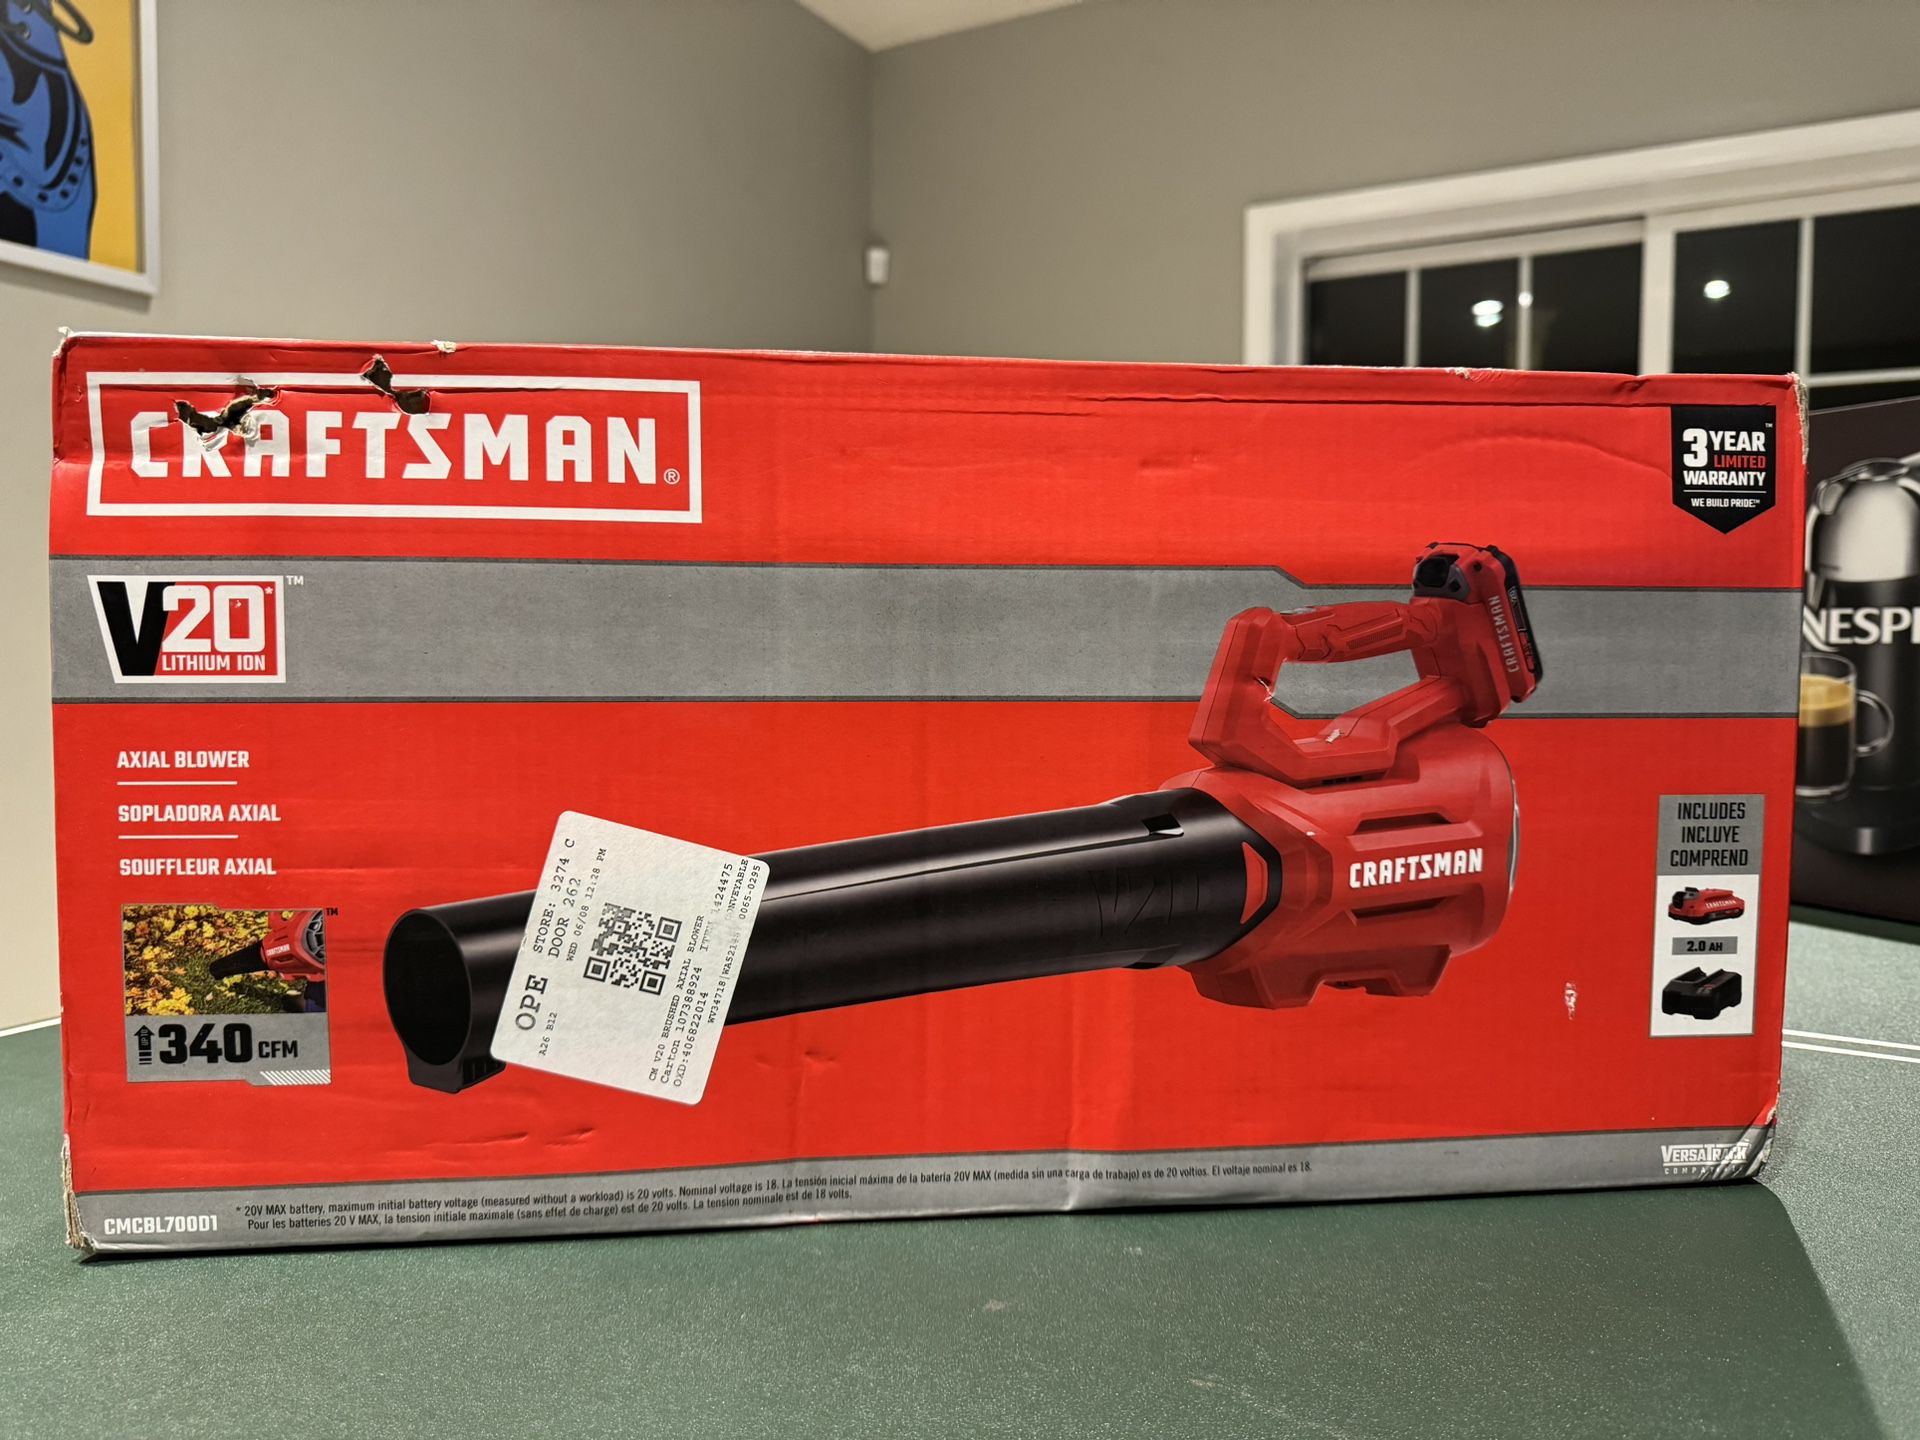 Unopened Craftsman V20 Cordless Axial Blower